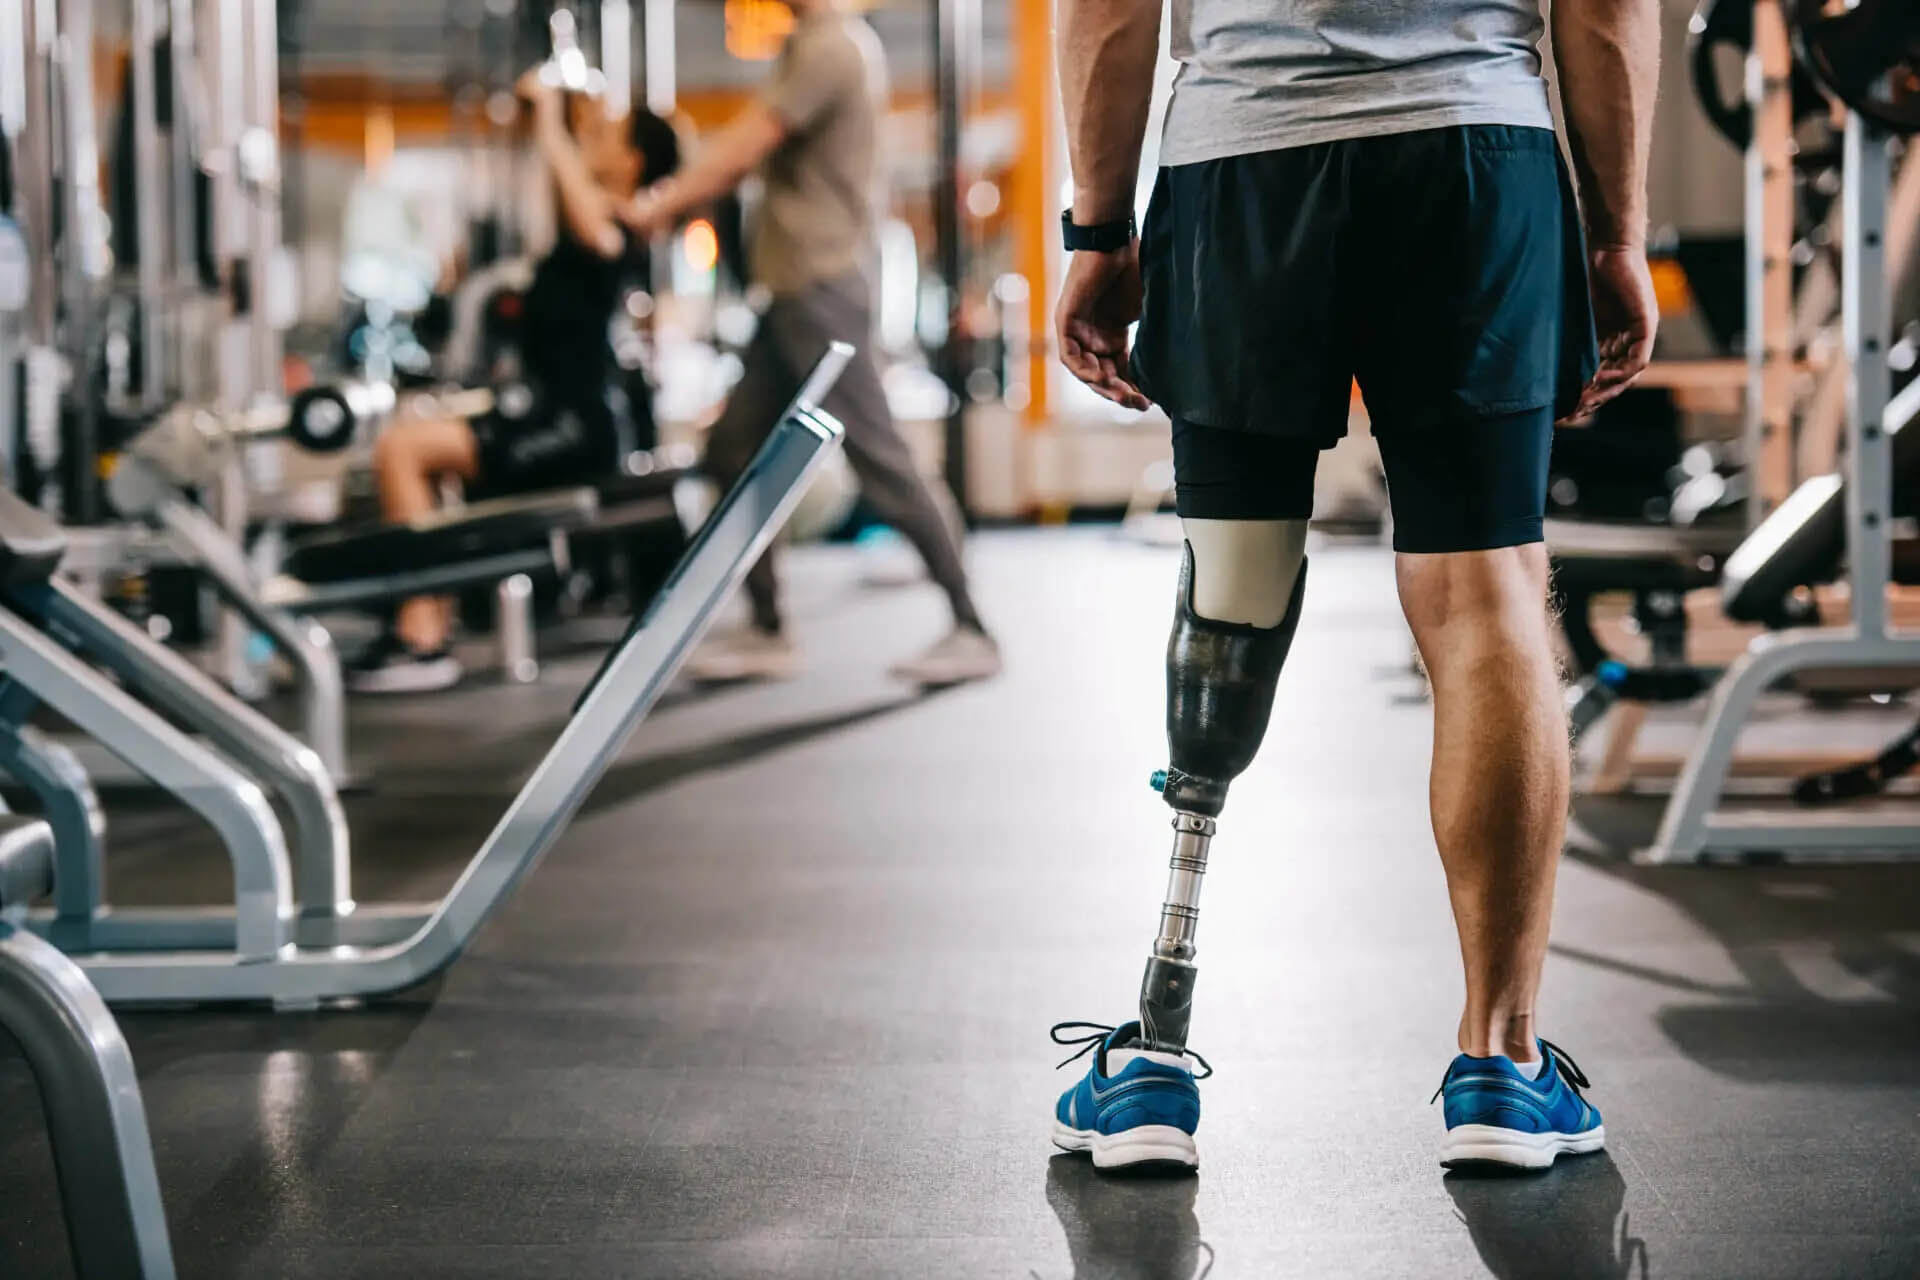 Person with prosthetic leg in a gym